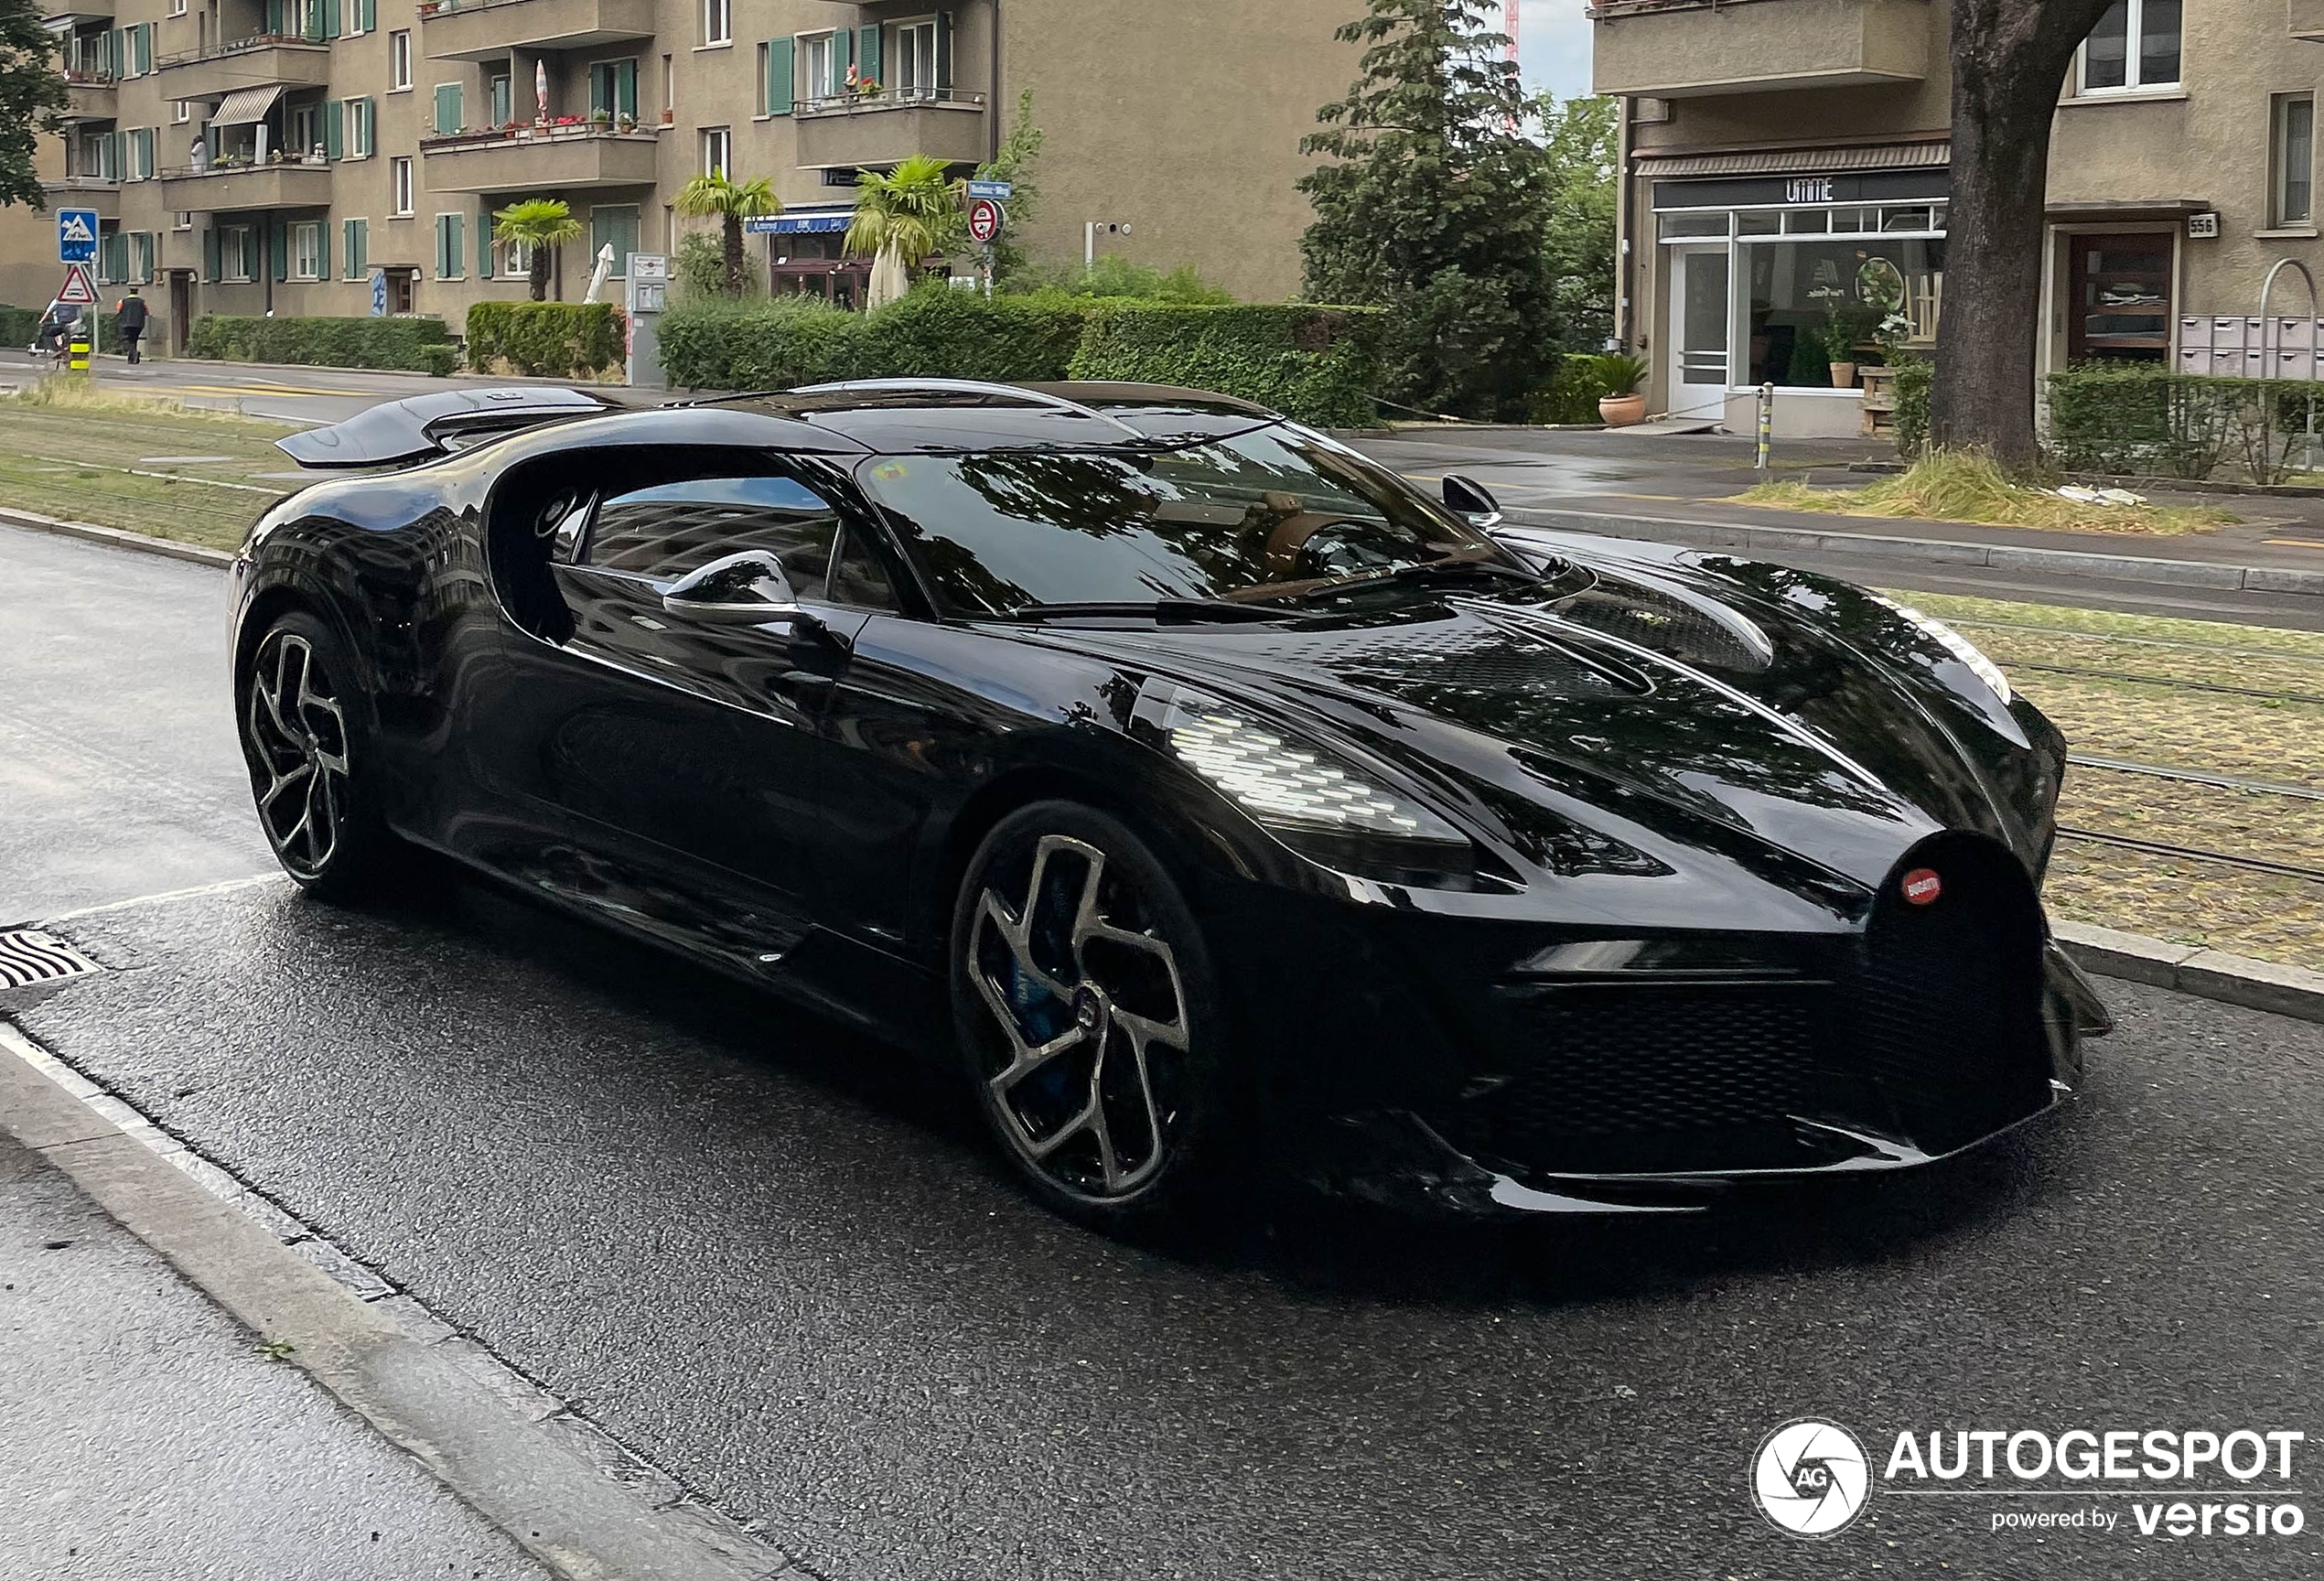 The one and only La Voiture Noire shows up in Zurich